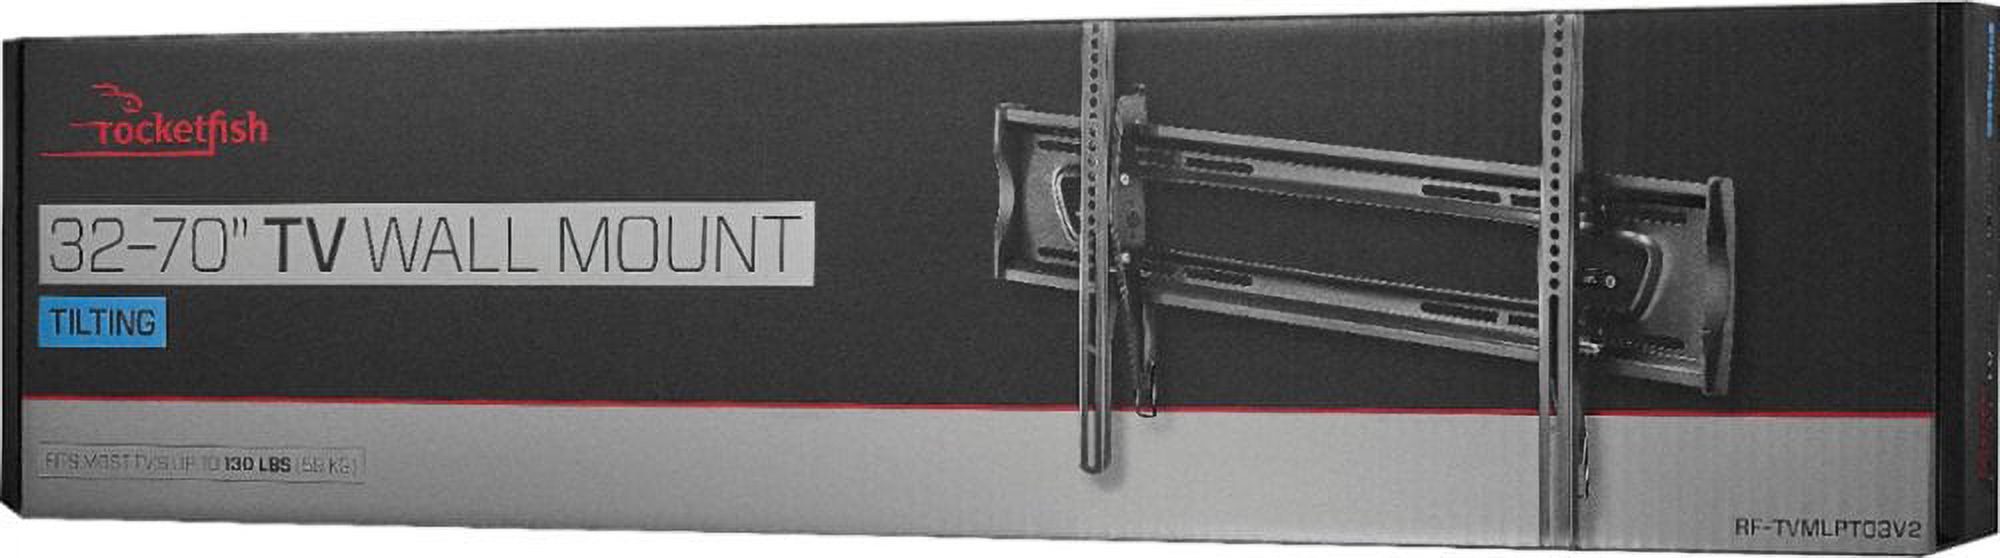 Rocketfish RF-TVMLPT03 Low-Profile Tilting Wall Mount - Mounting kit (tilt wall mount) - Low Profile Mount - for LCD TV - black powder coat - screen size: 32"-70" - mounting interface: 700 x 400 mm - wall-mountable - image 3 of 4